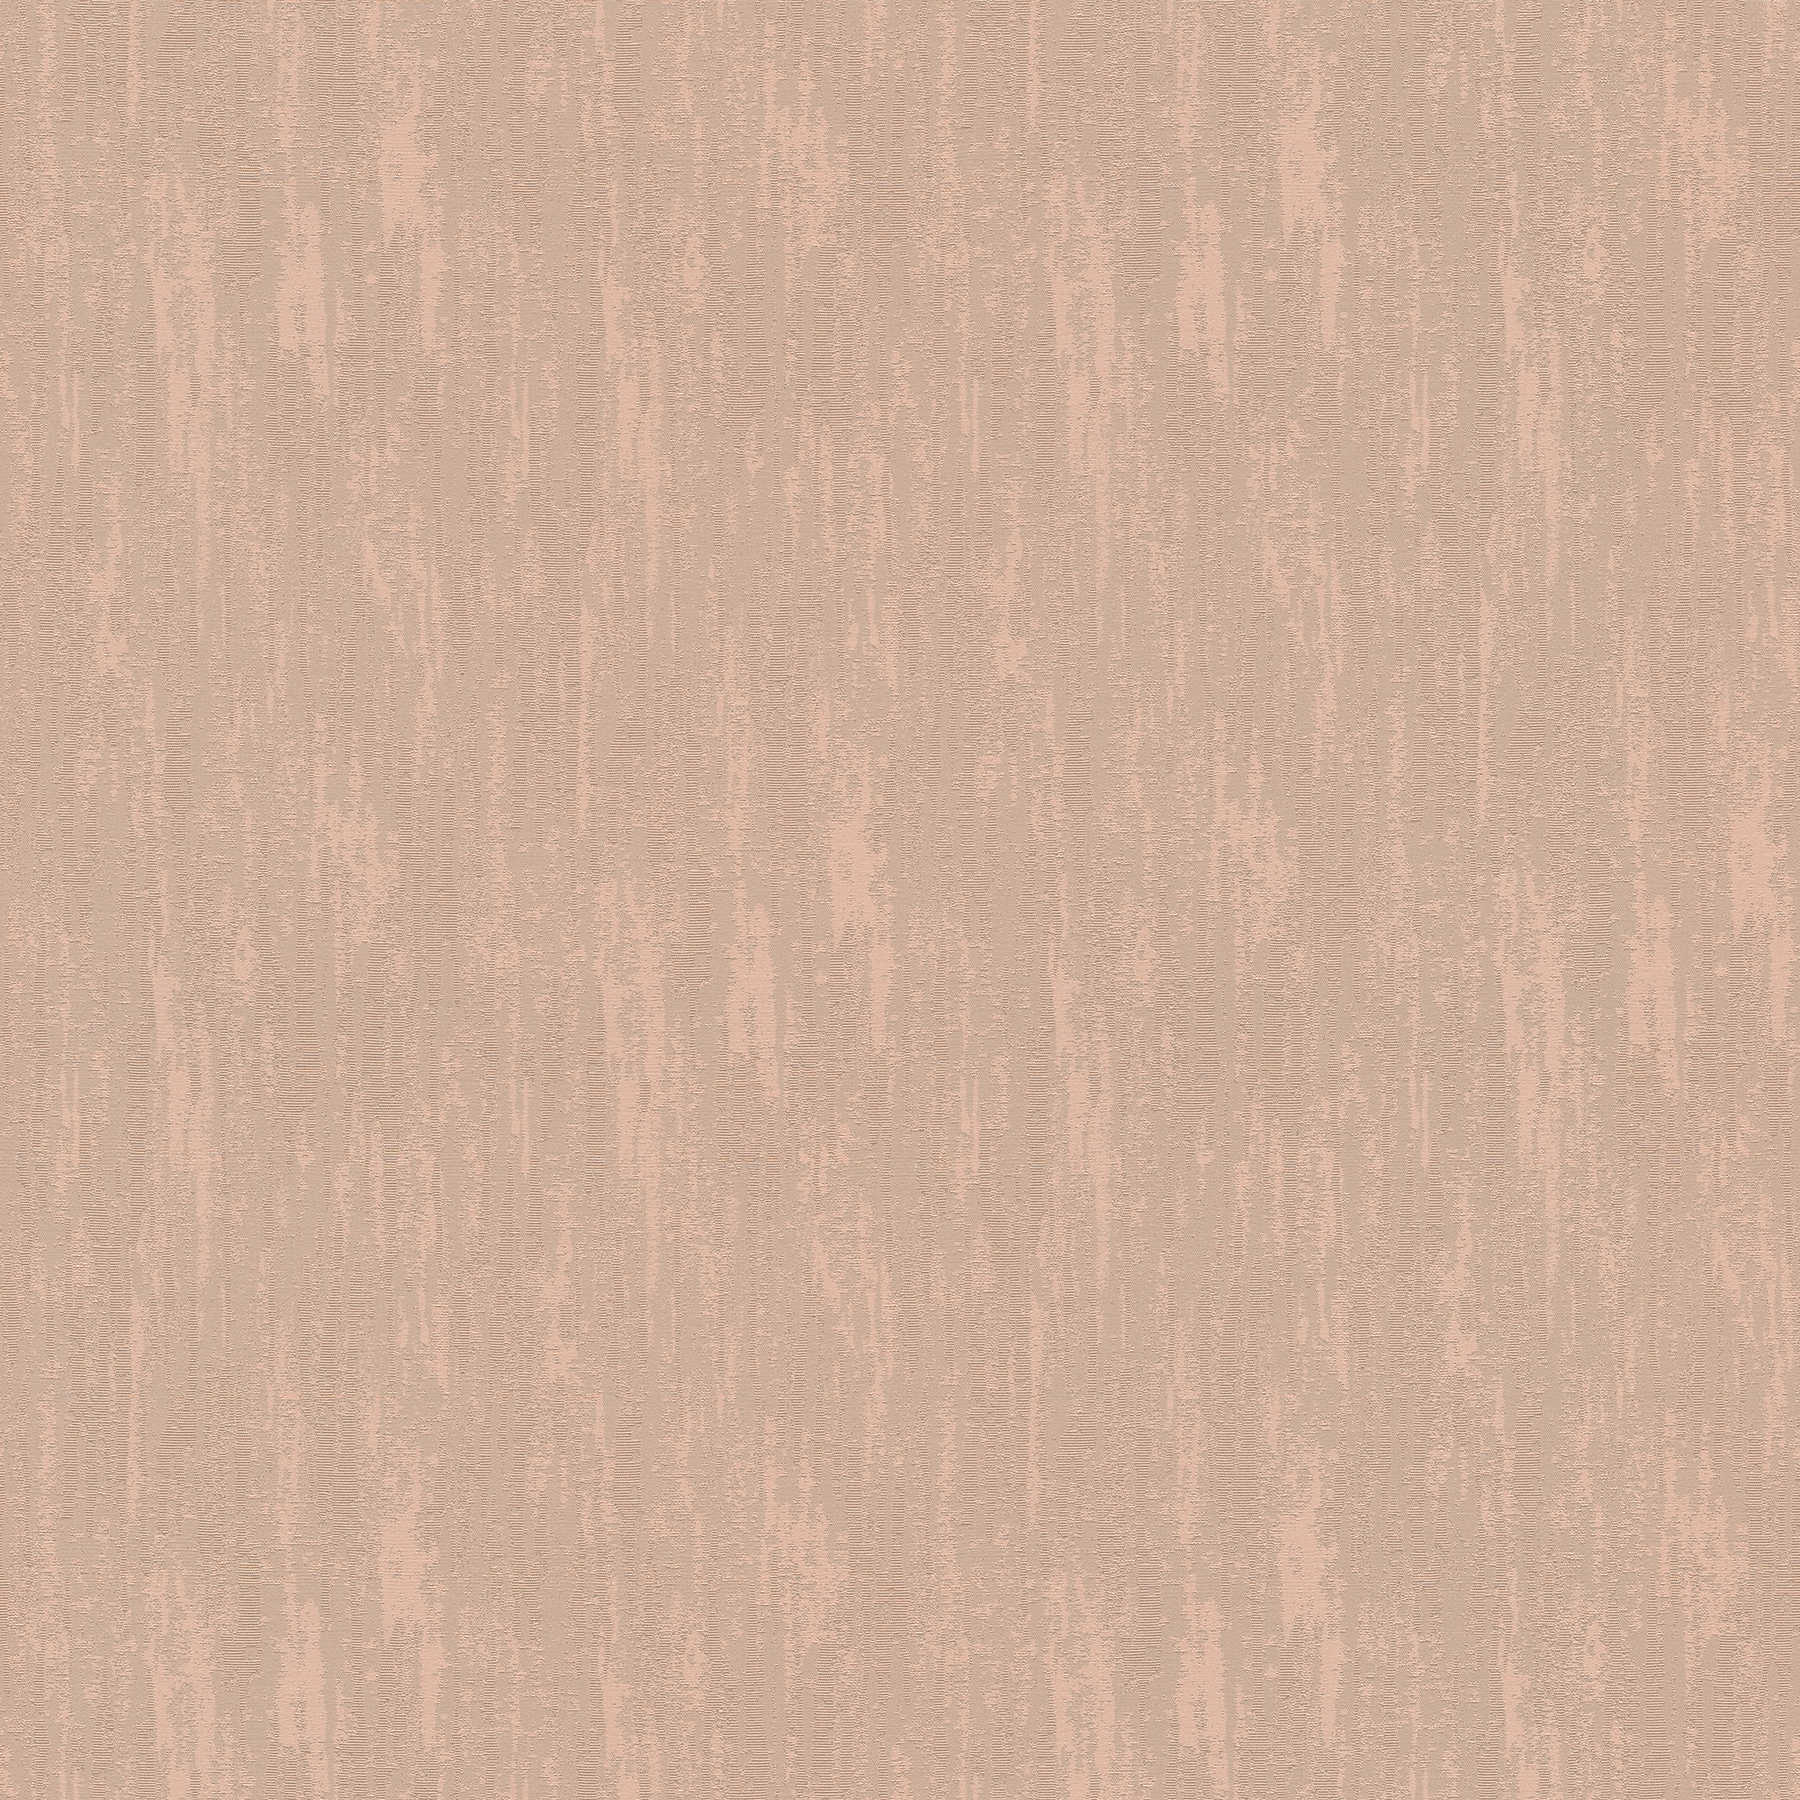 High quality non-woven wallpaper plain with glitter effect - brown
